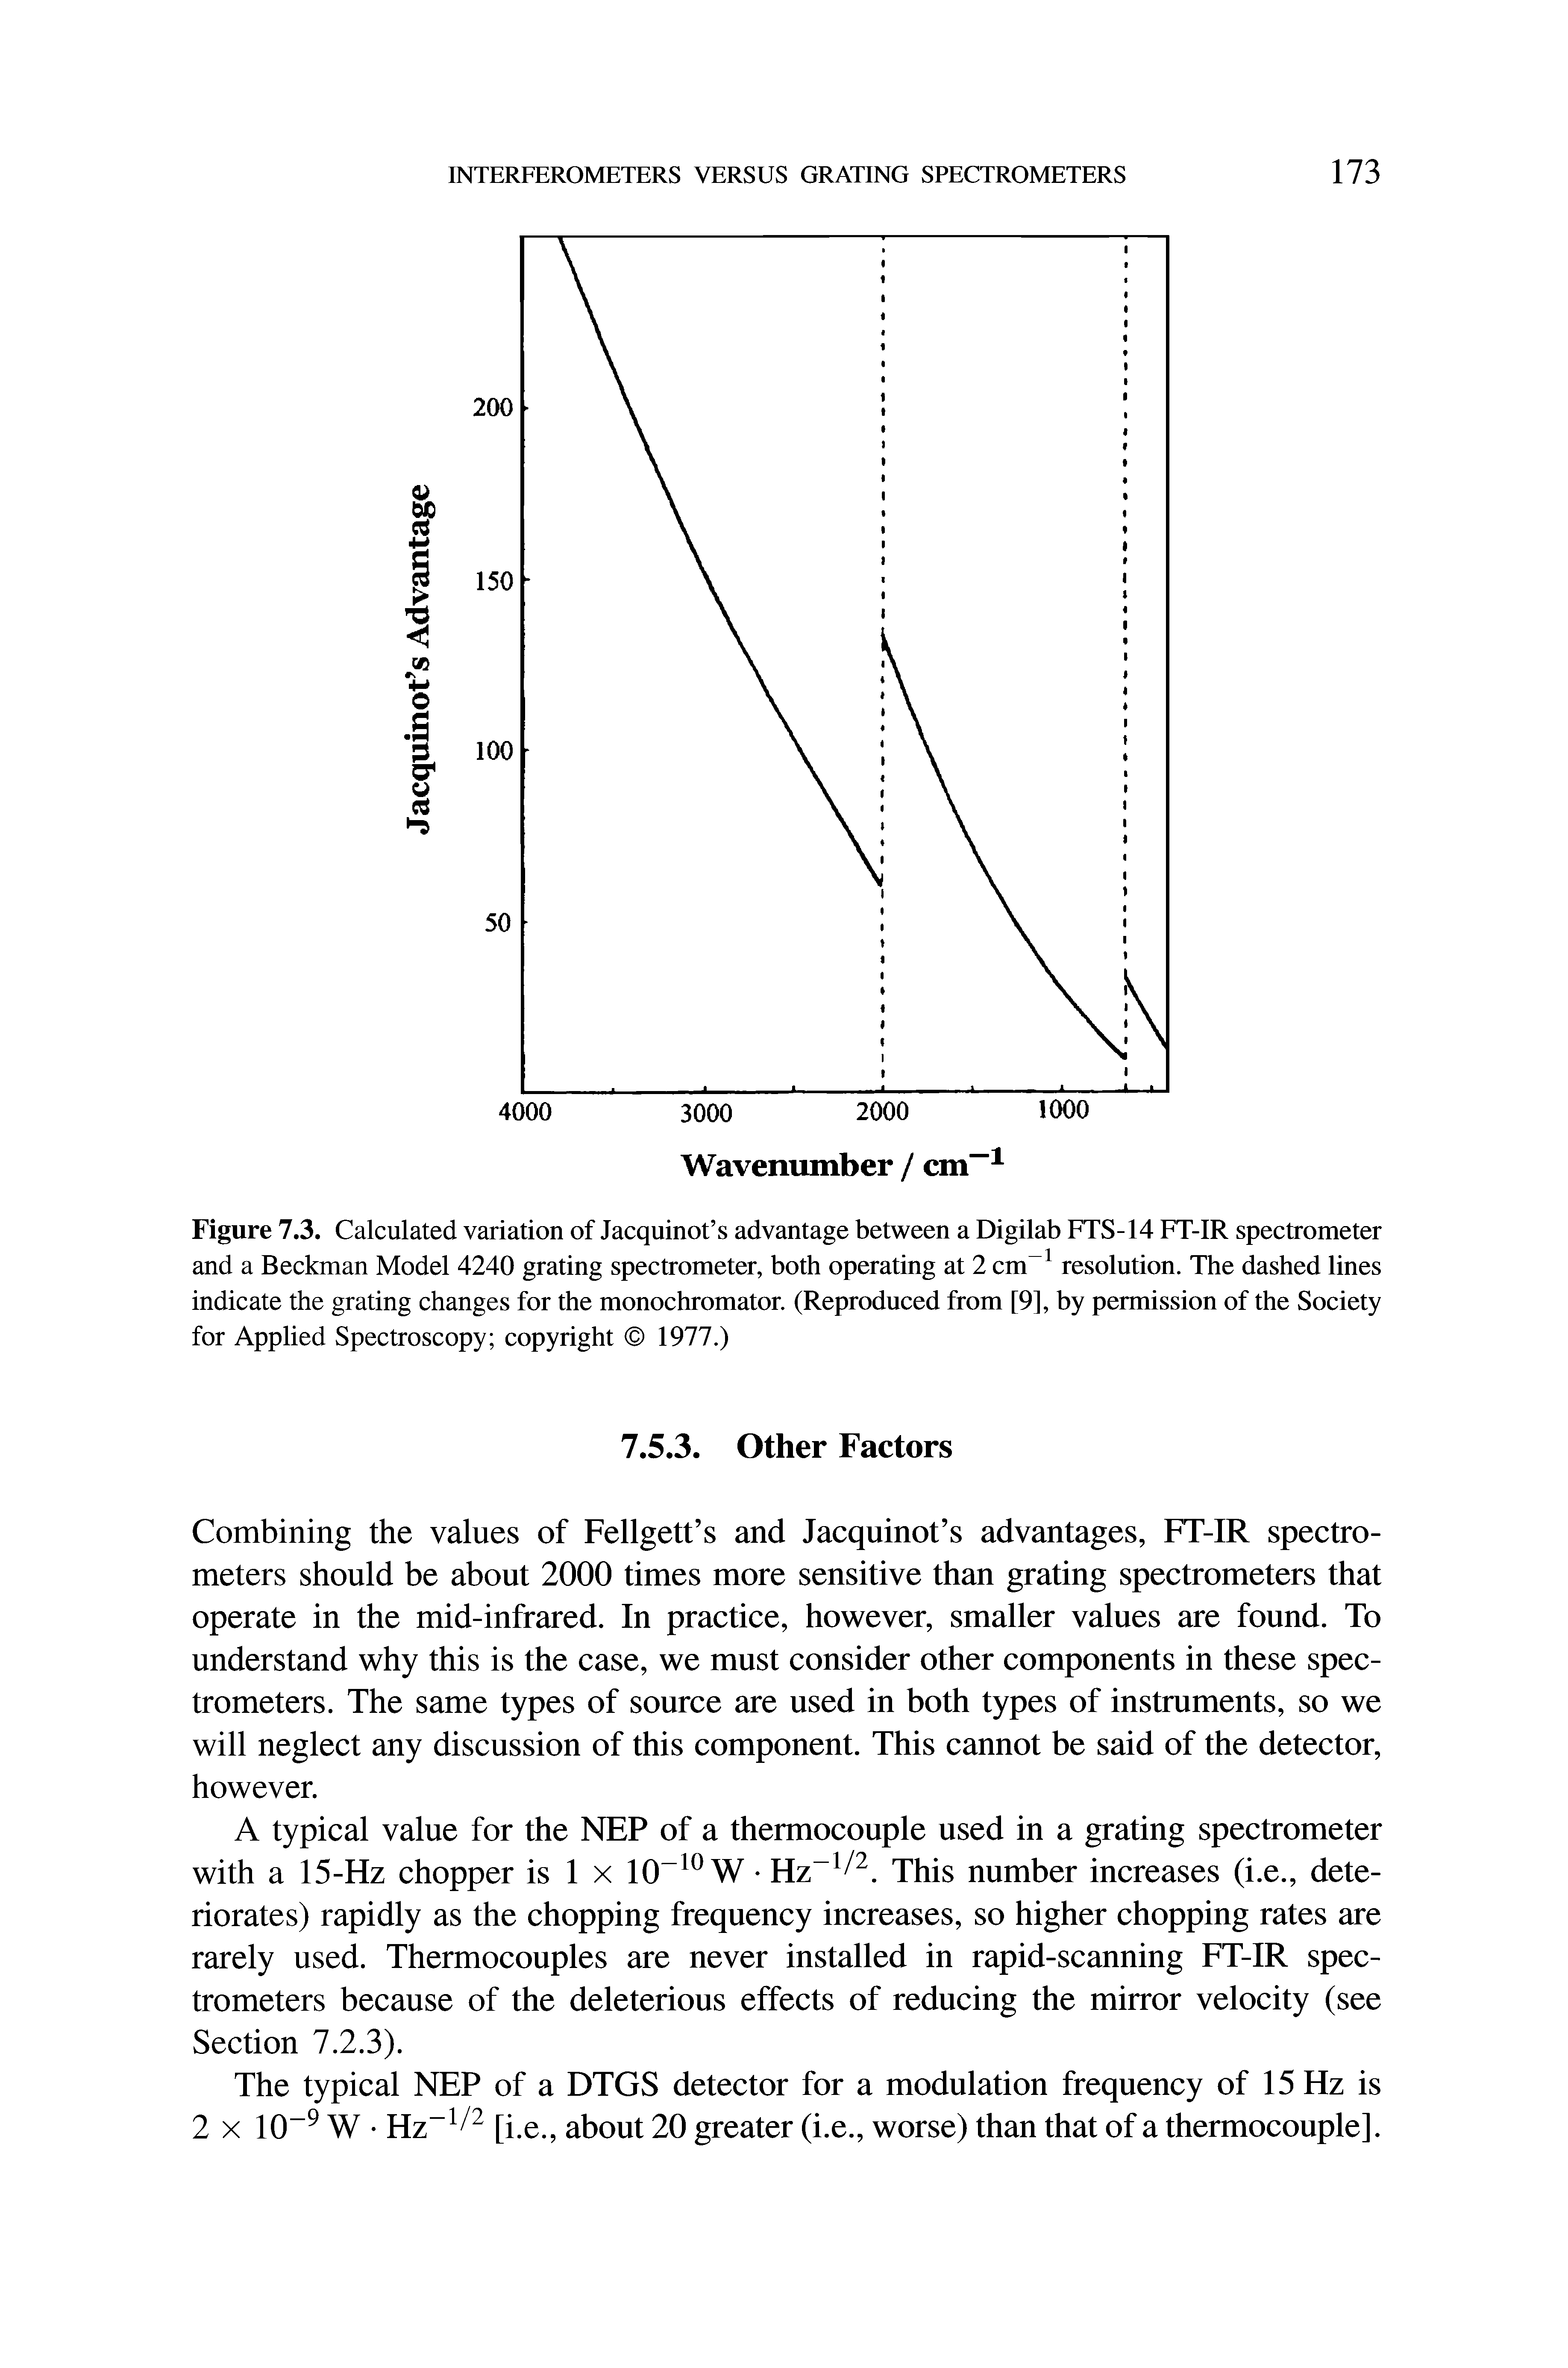 Figure 7.3. Calculated variation of Jacquinot s advantage between a Digilab FTS-14 FT-IR spectrometer and a Beckman Model 4240 grating spectrometer, both operating at 2 cm resolution. The dashed lines indicate the grating changes for the monochromator. (Reproduced from [9], by permission of the Society for Applied Spectroscopy copyright 1977.)...